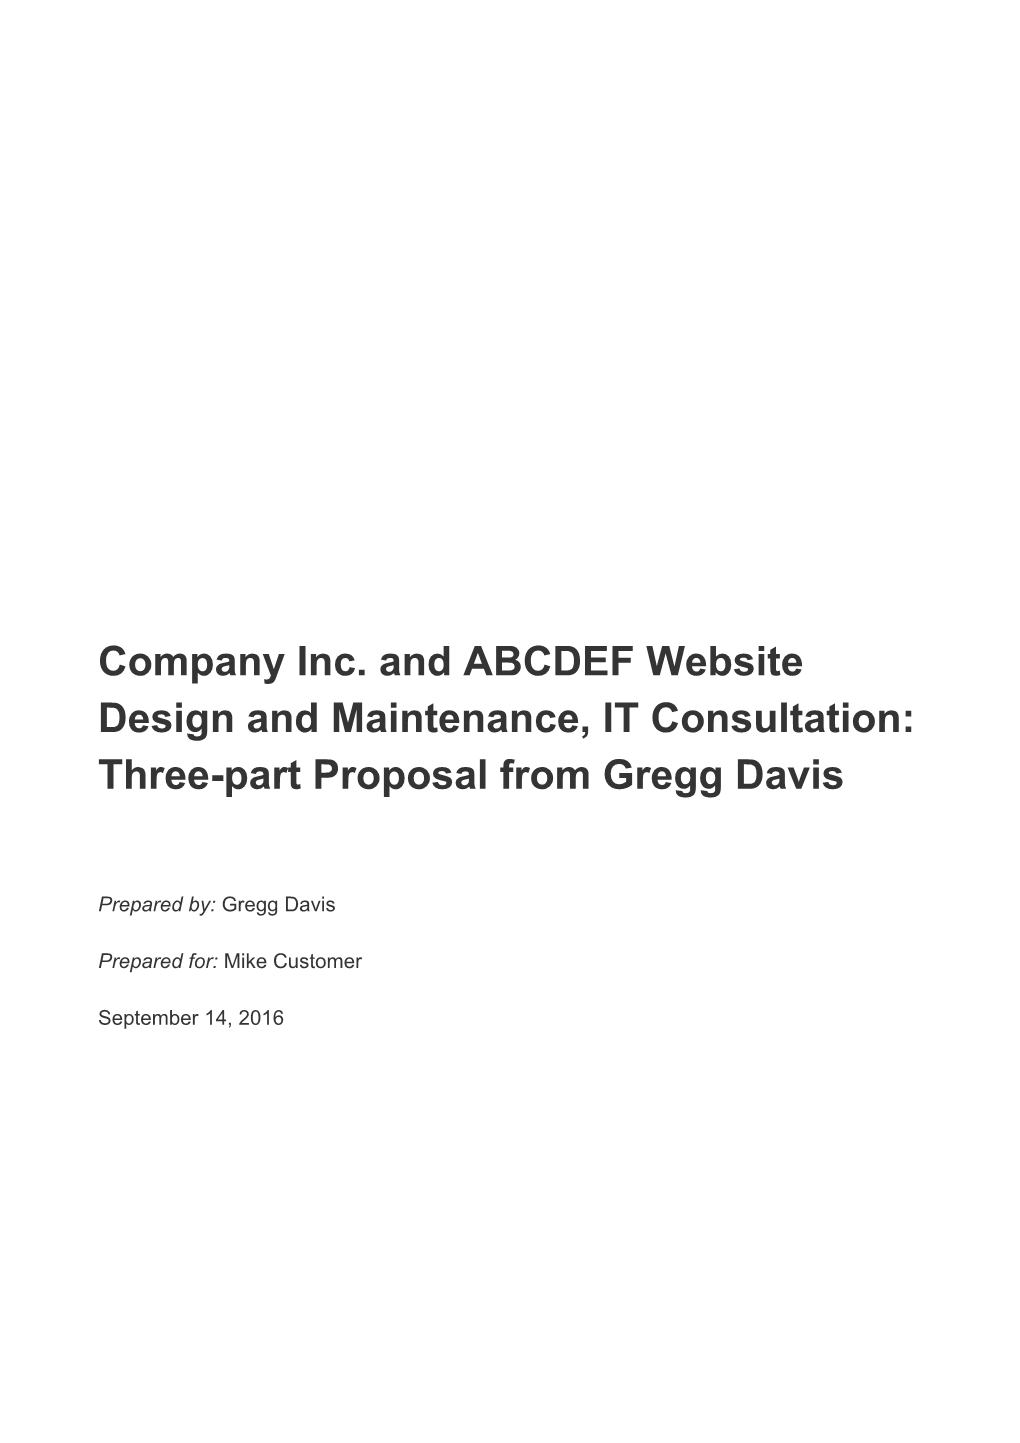 Company Inc. and ABCDEF Website Design and Maintenance, IT Consultation